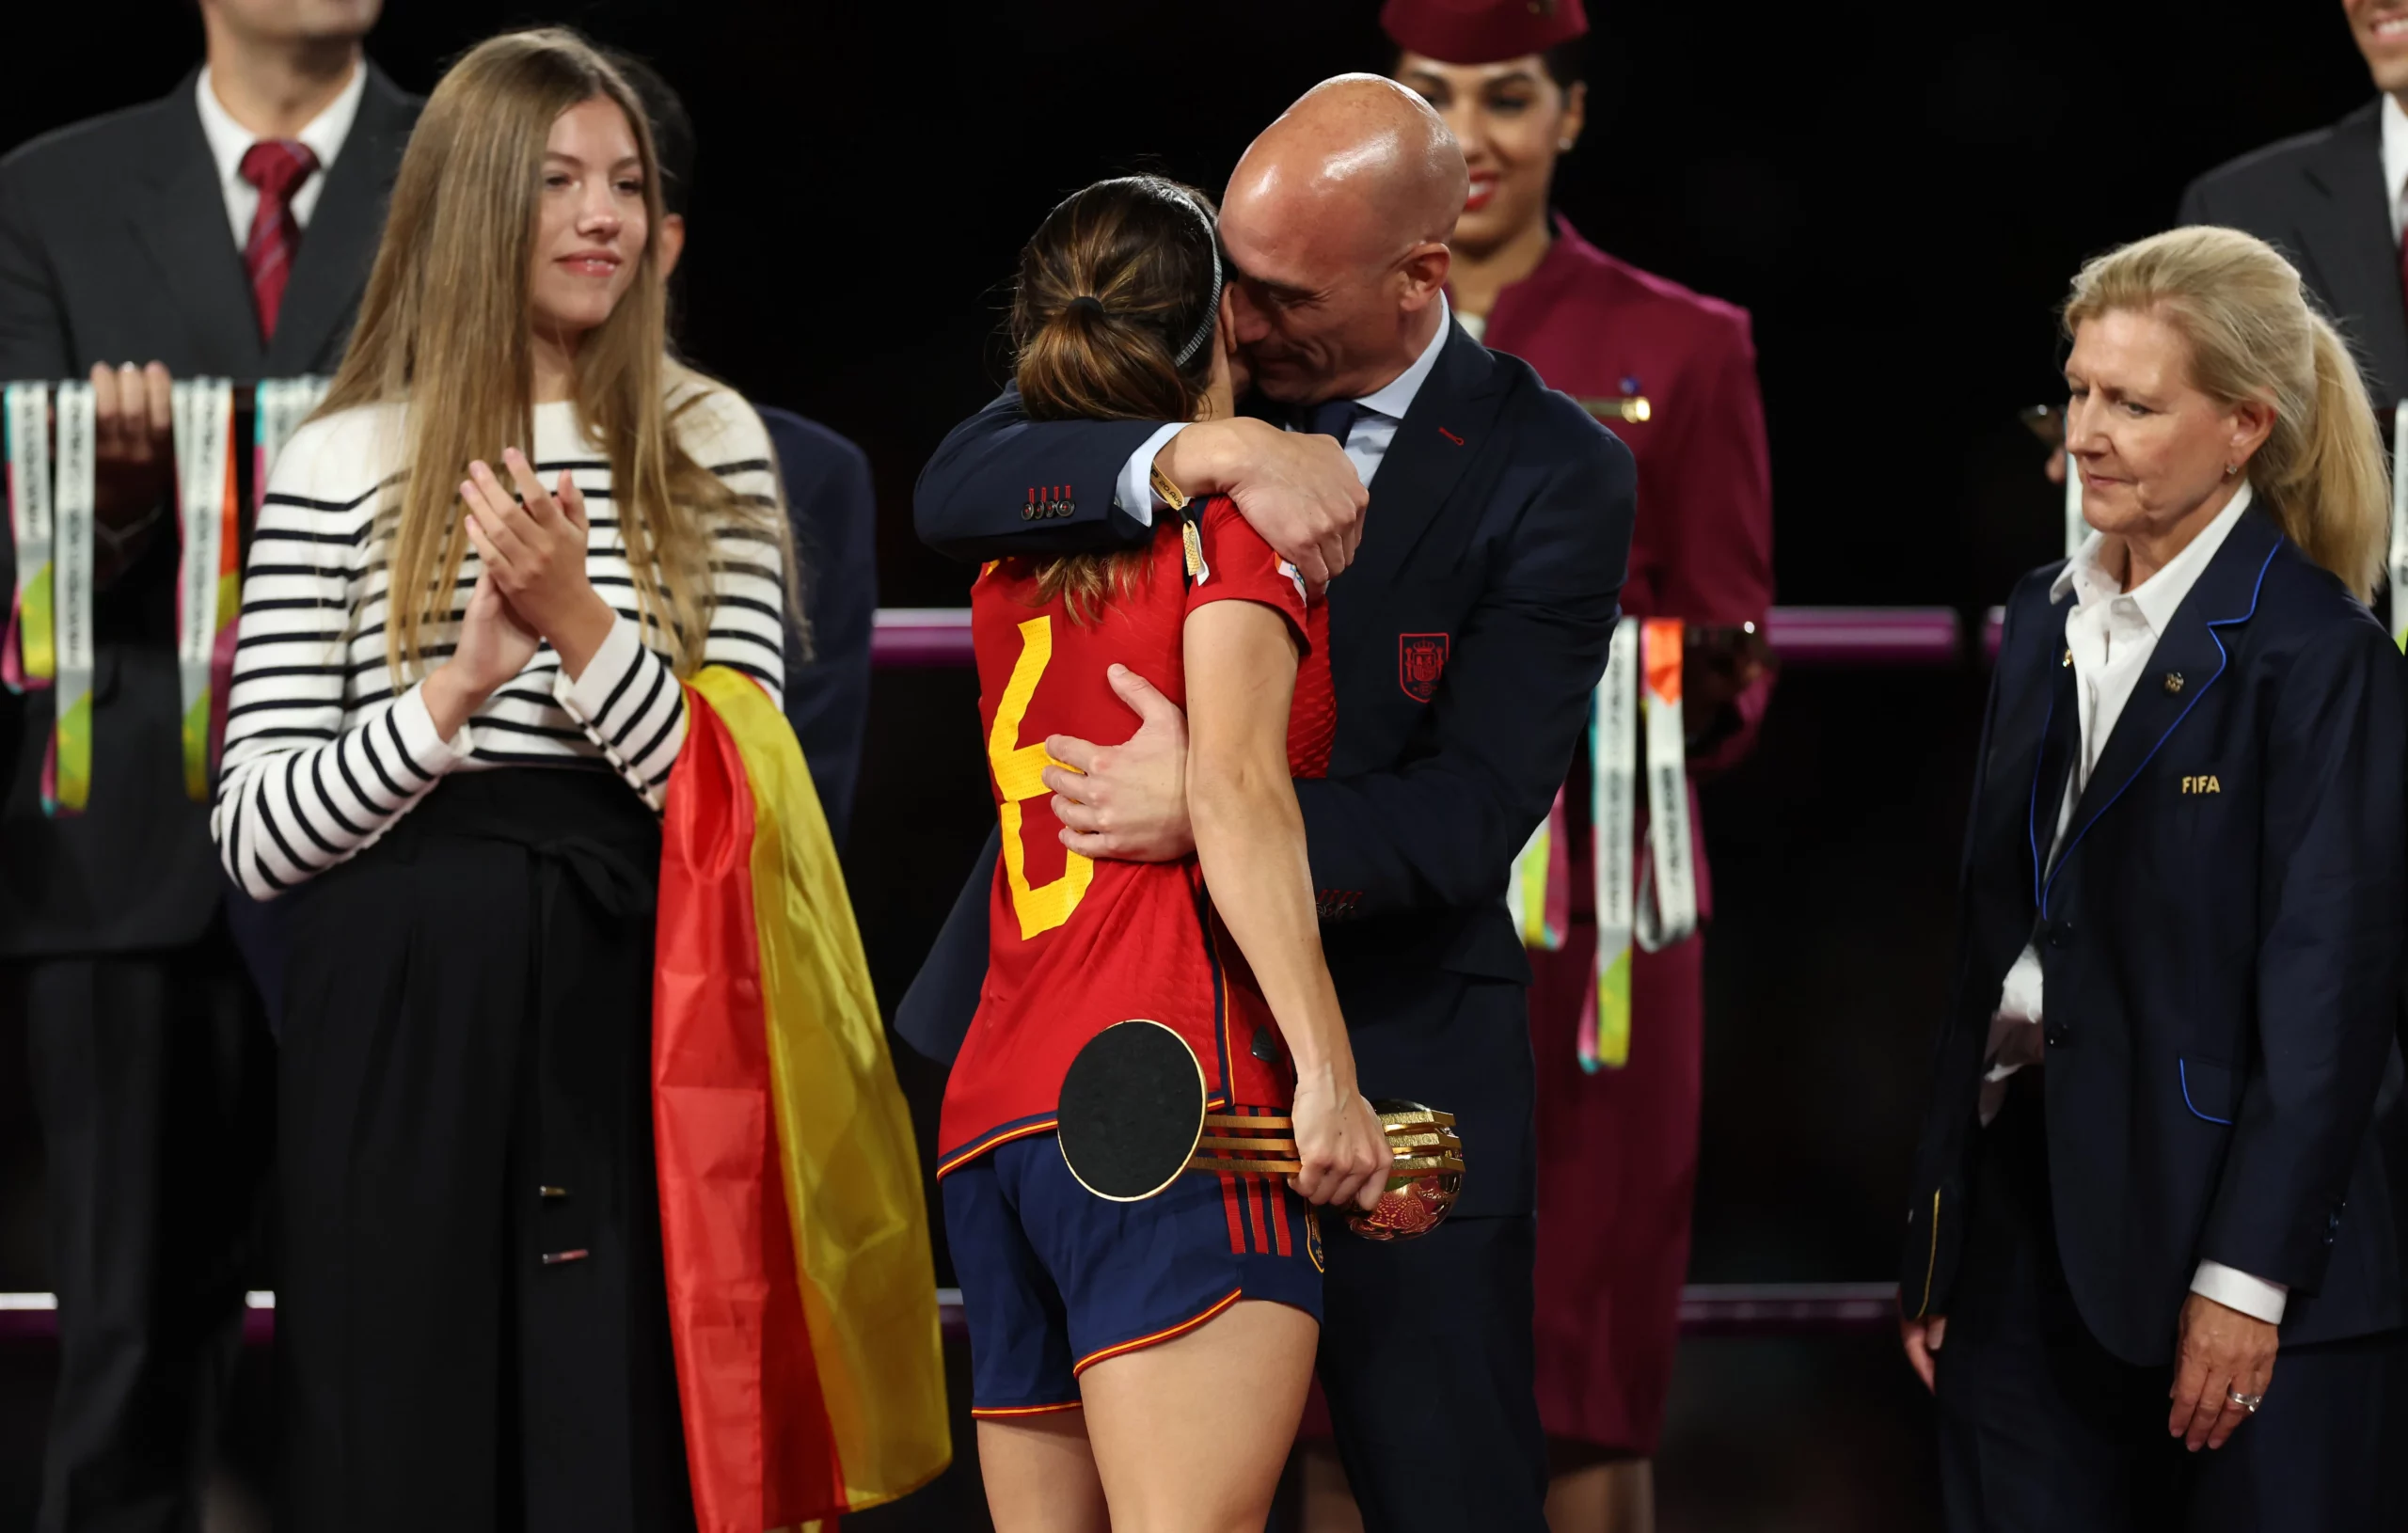 The Press Officer of the Spanish Women’s Team Admits Pressure for Jenni Hermoso to Agree that Rubiales’ Kiss was Consensual